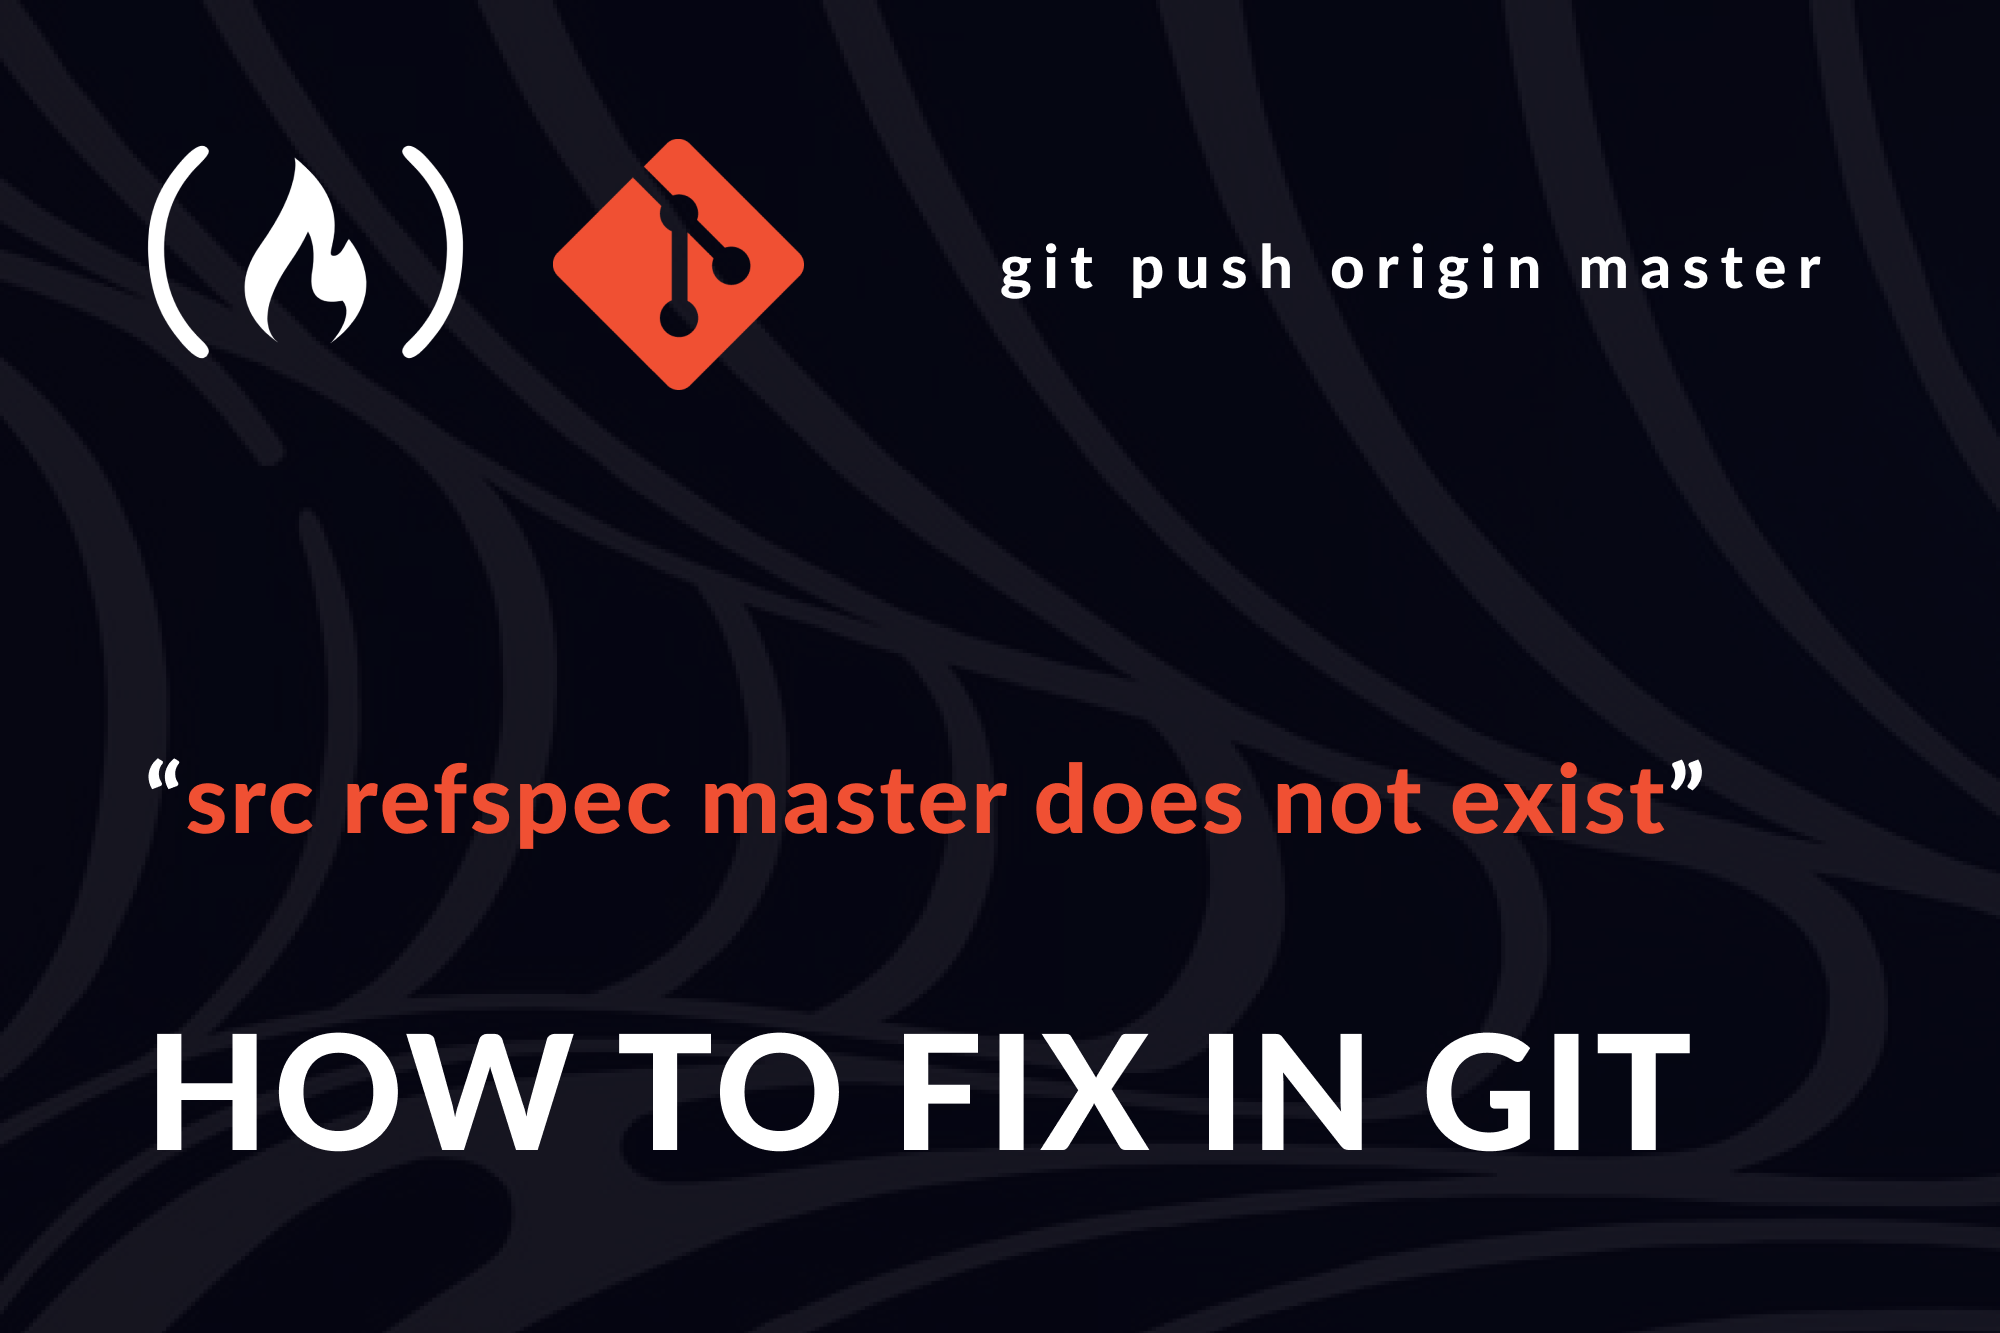 Error: src refspec master does not match any – How to Fix in Git